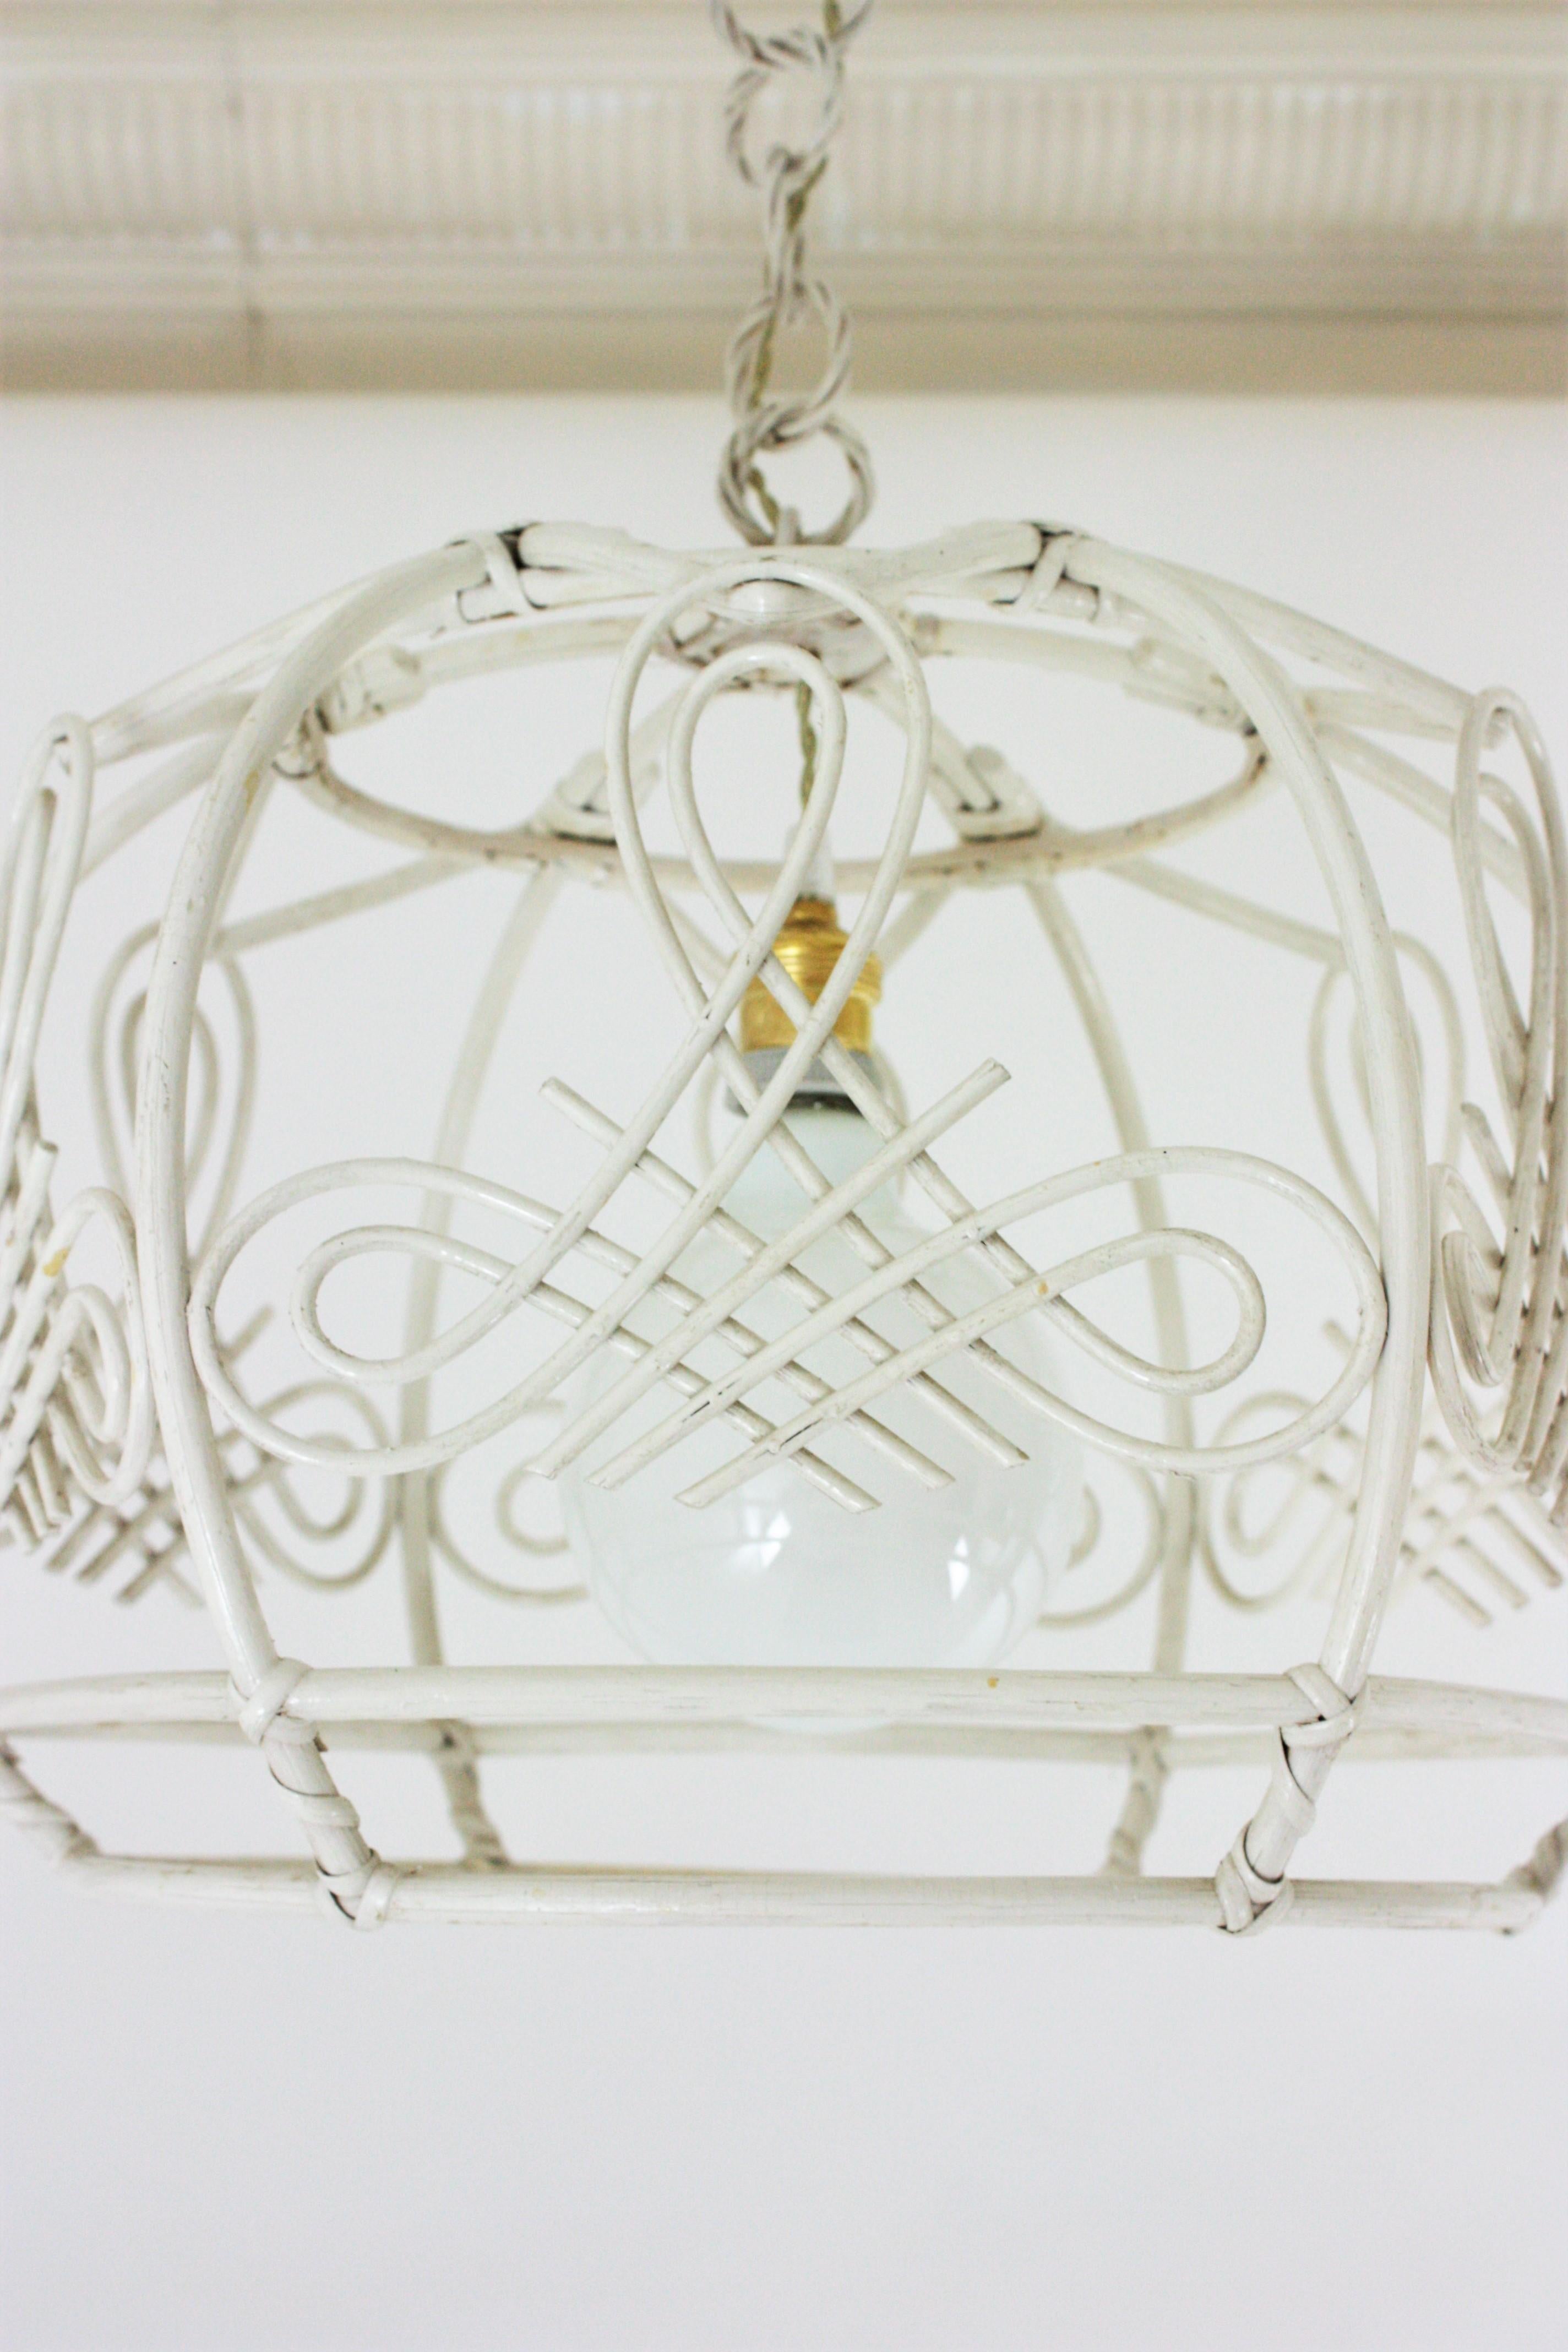 French Rattan Bell Pendant Lamp / Lantern in White Patina, 1960s For Sale 2